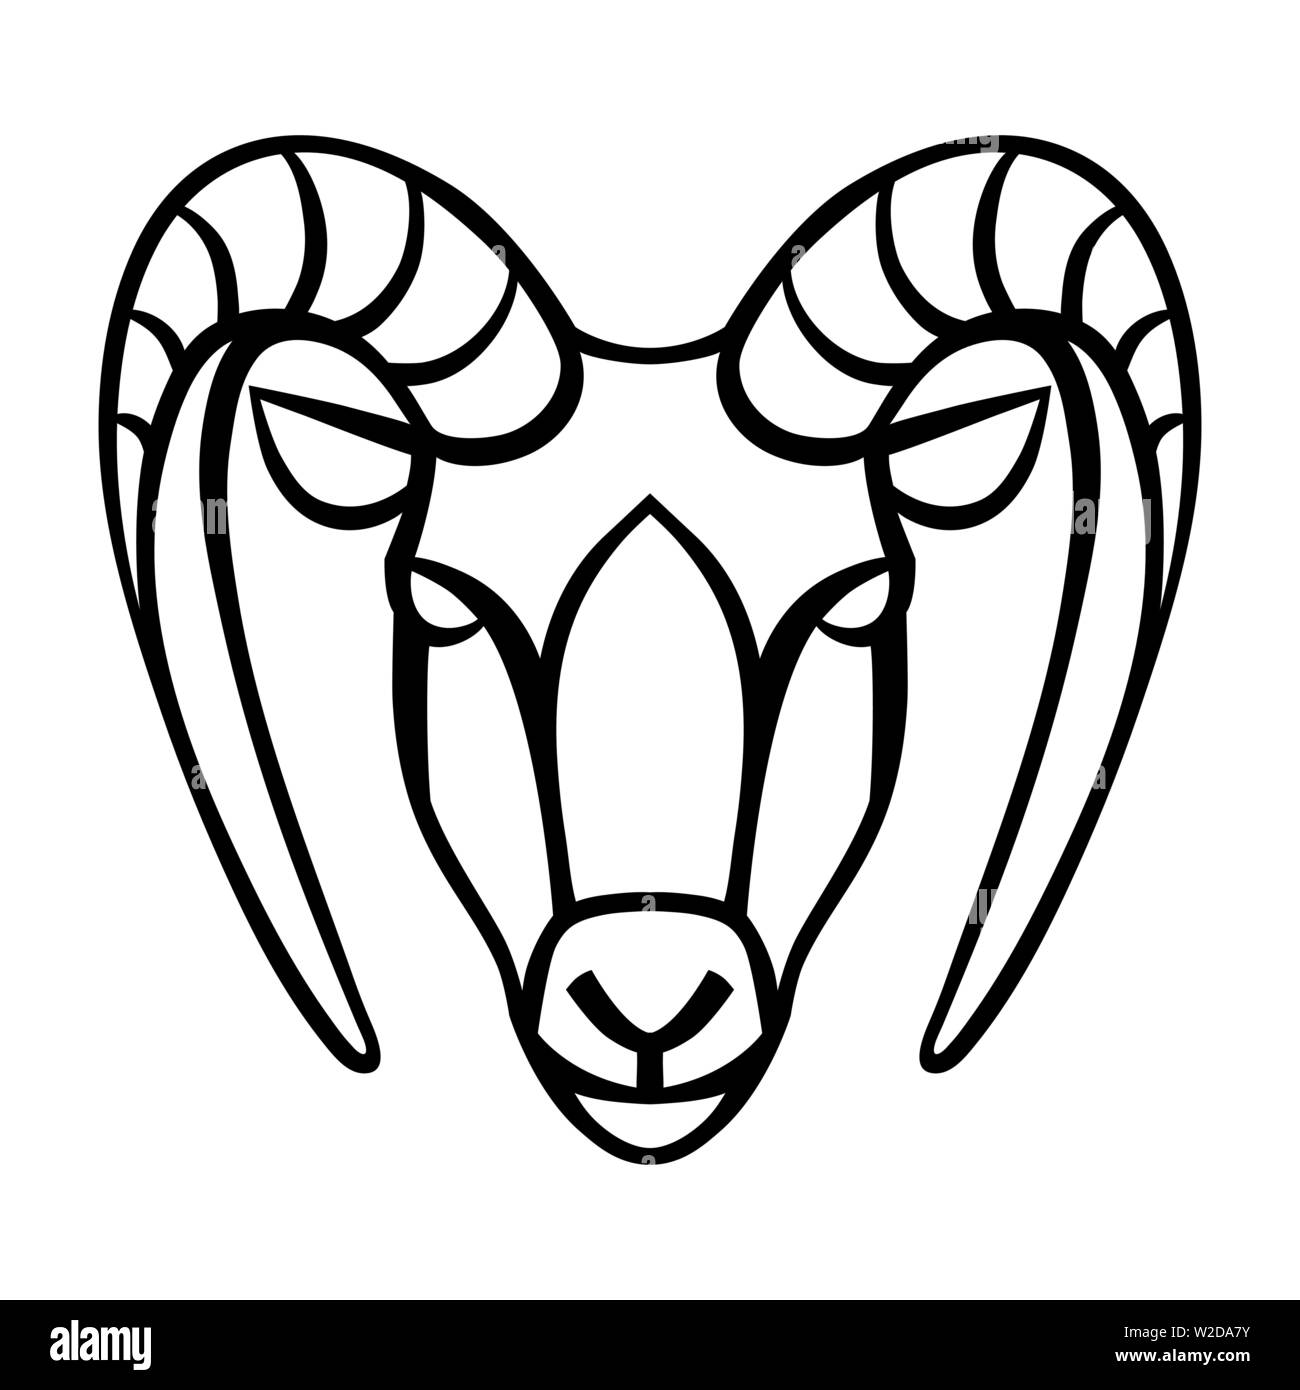 Capricorn horn Stock Vector Images - Alamy